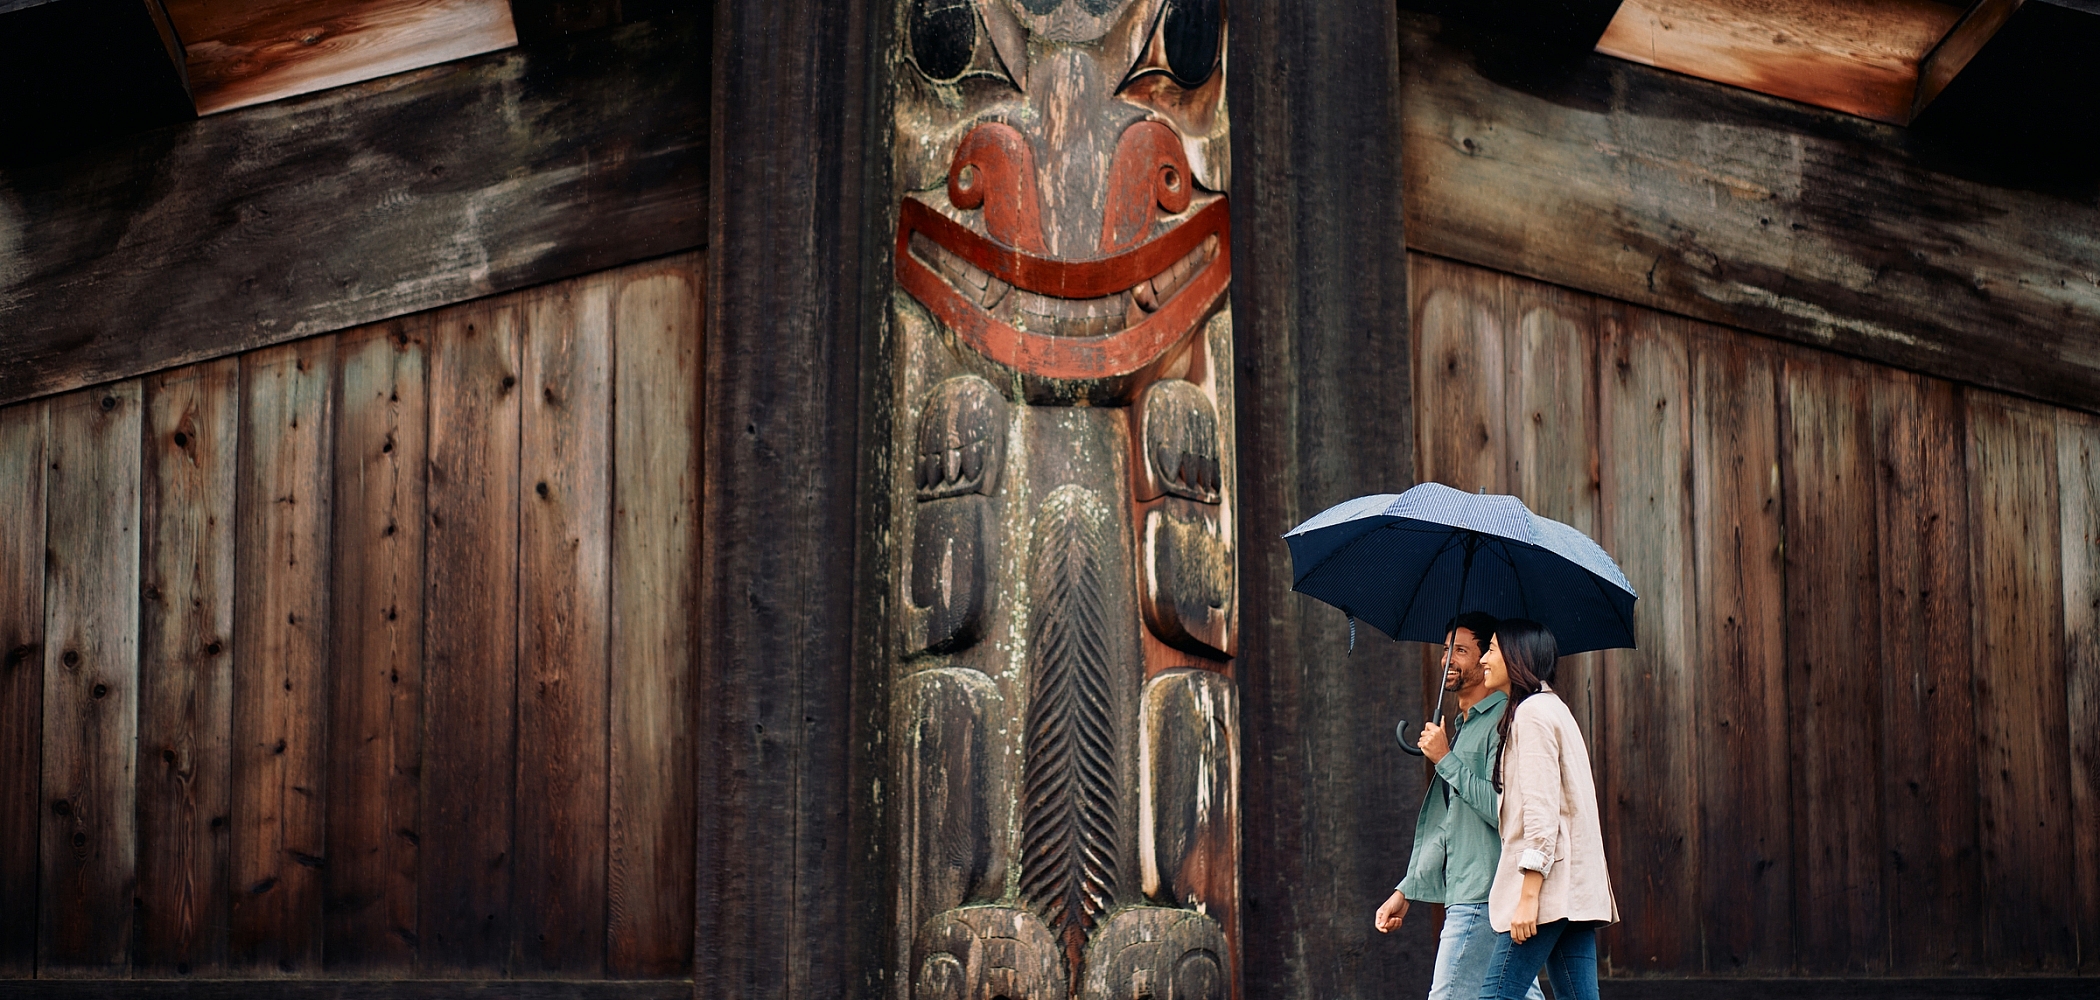 Two people walk under a blue umbrella with a weathered Indigenous pole and building behind them.